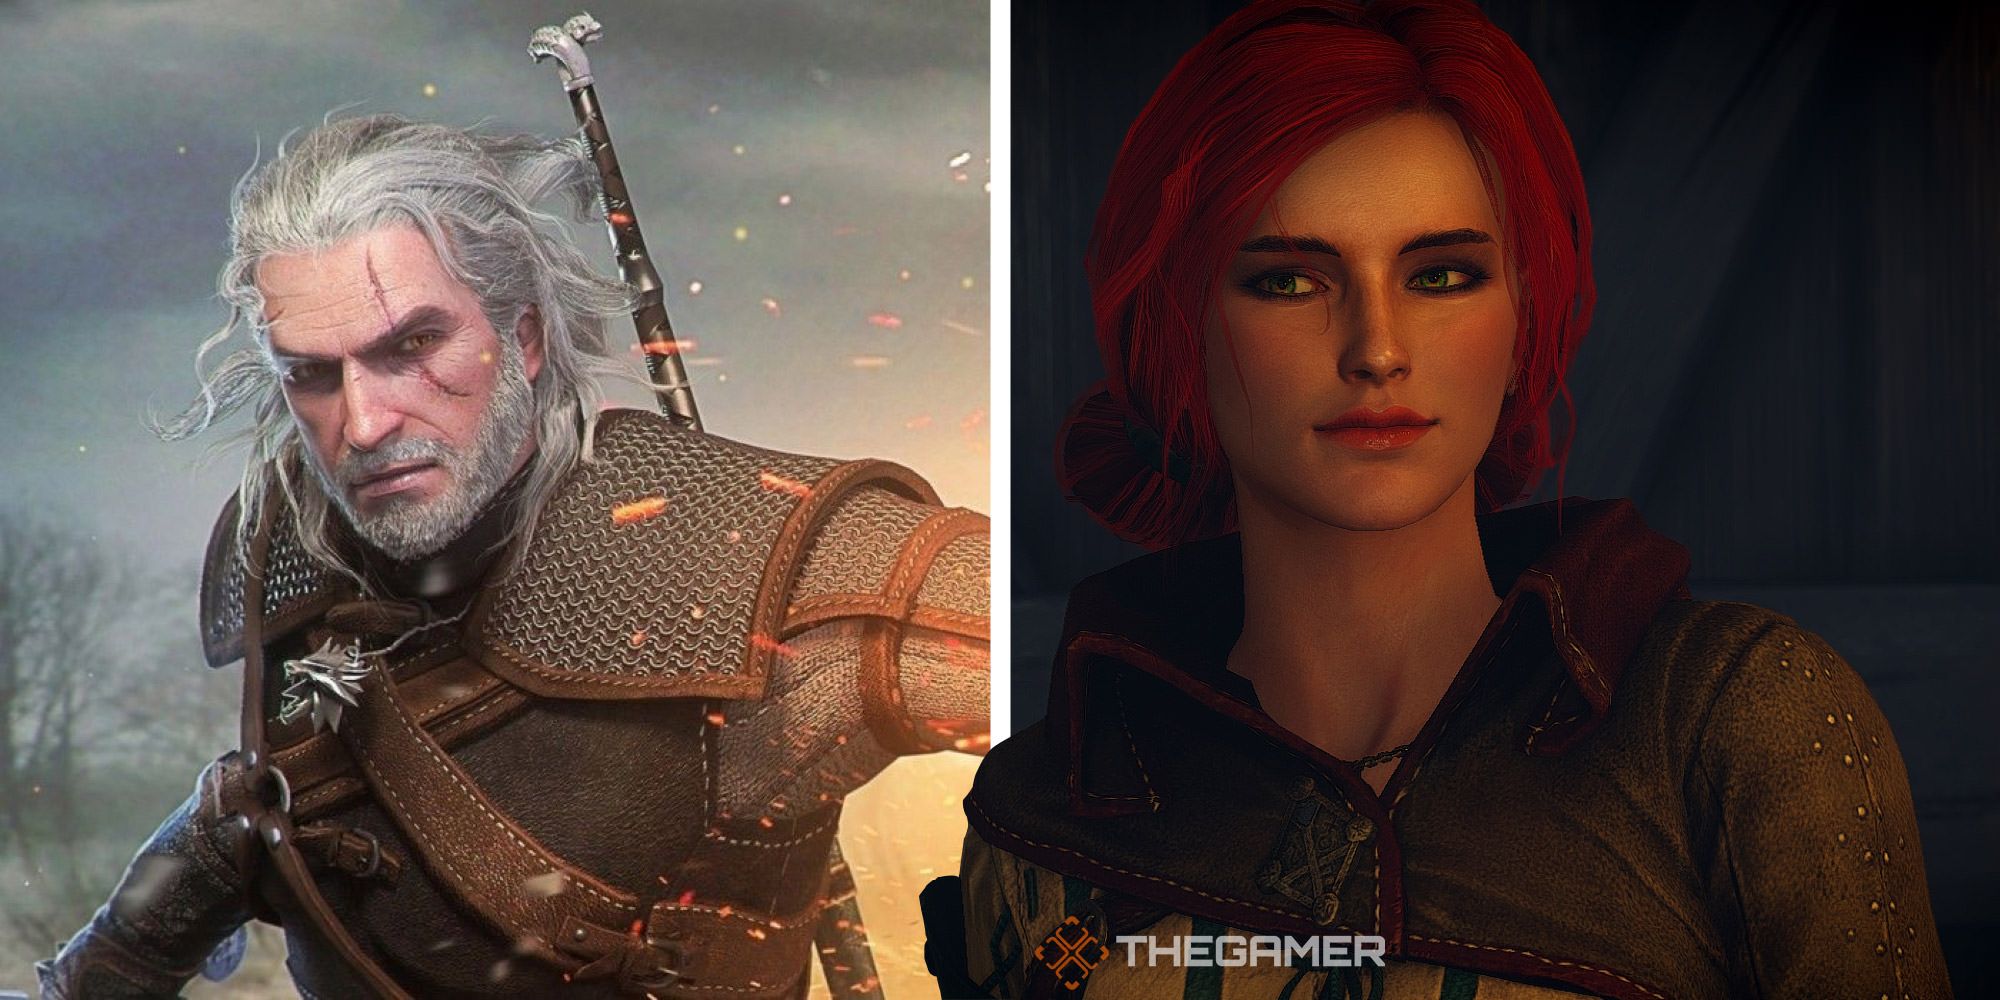 The myth of the missing Witcher games on PlayStation